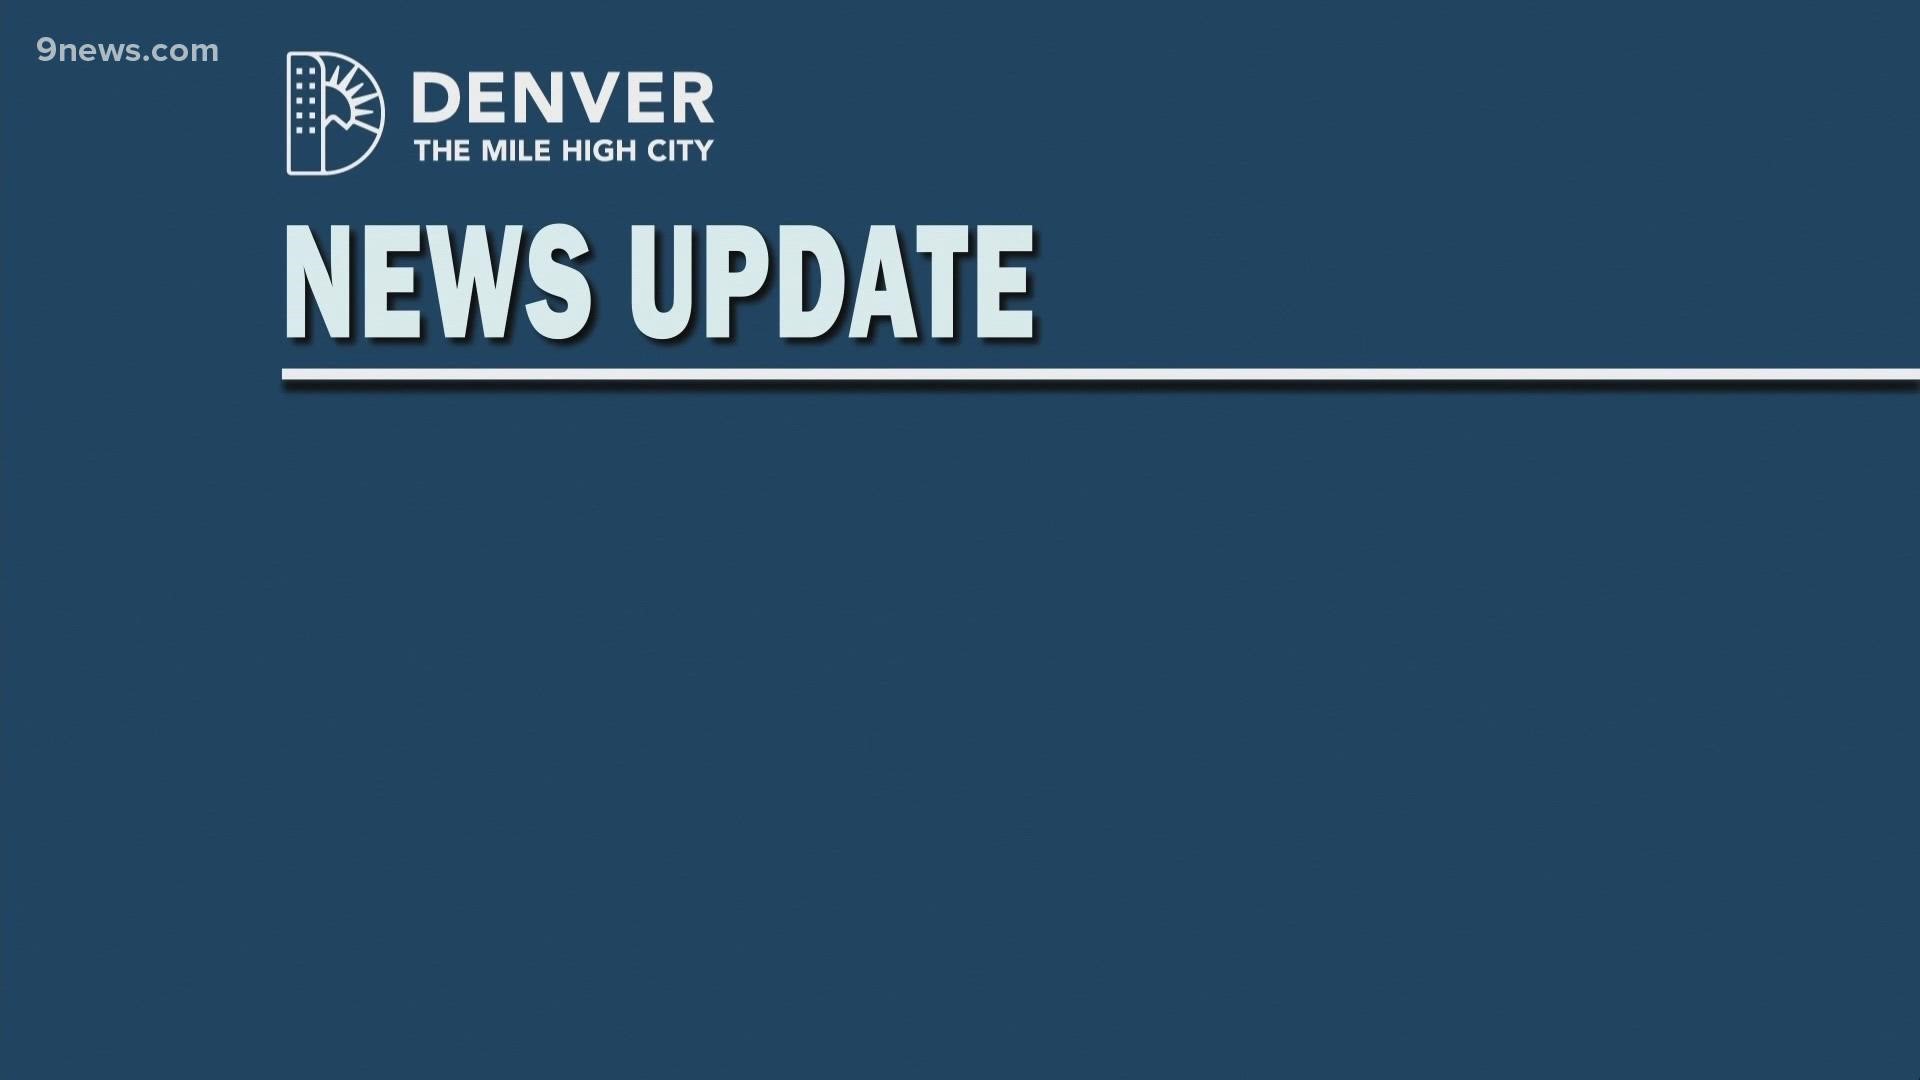 Denver announced that it will reactivate the city's emergency operations center to assist with vaccine distribution efforts.